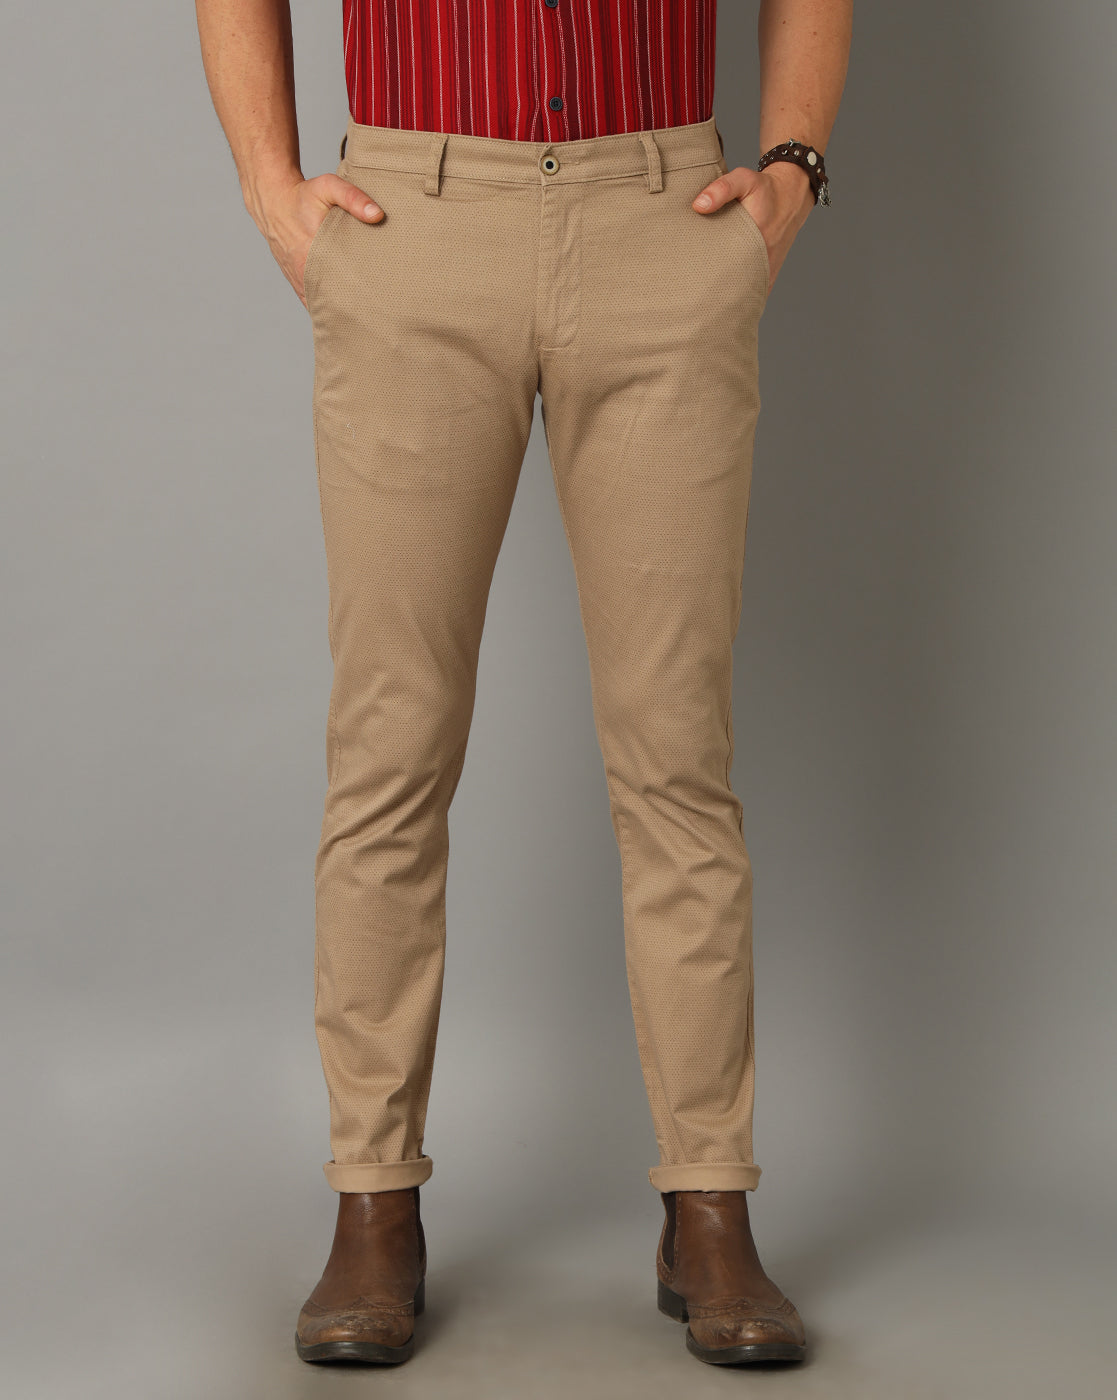 Classic Polo Men's 100% Cotton Moderate Fit Solid Beige Color Trouser | TO1-33 A-BEG